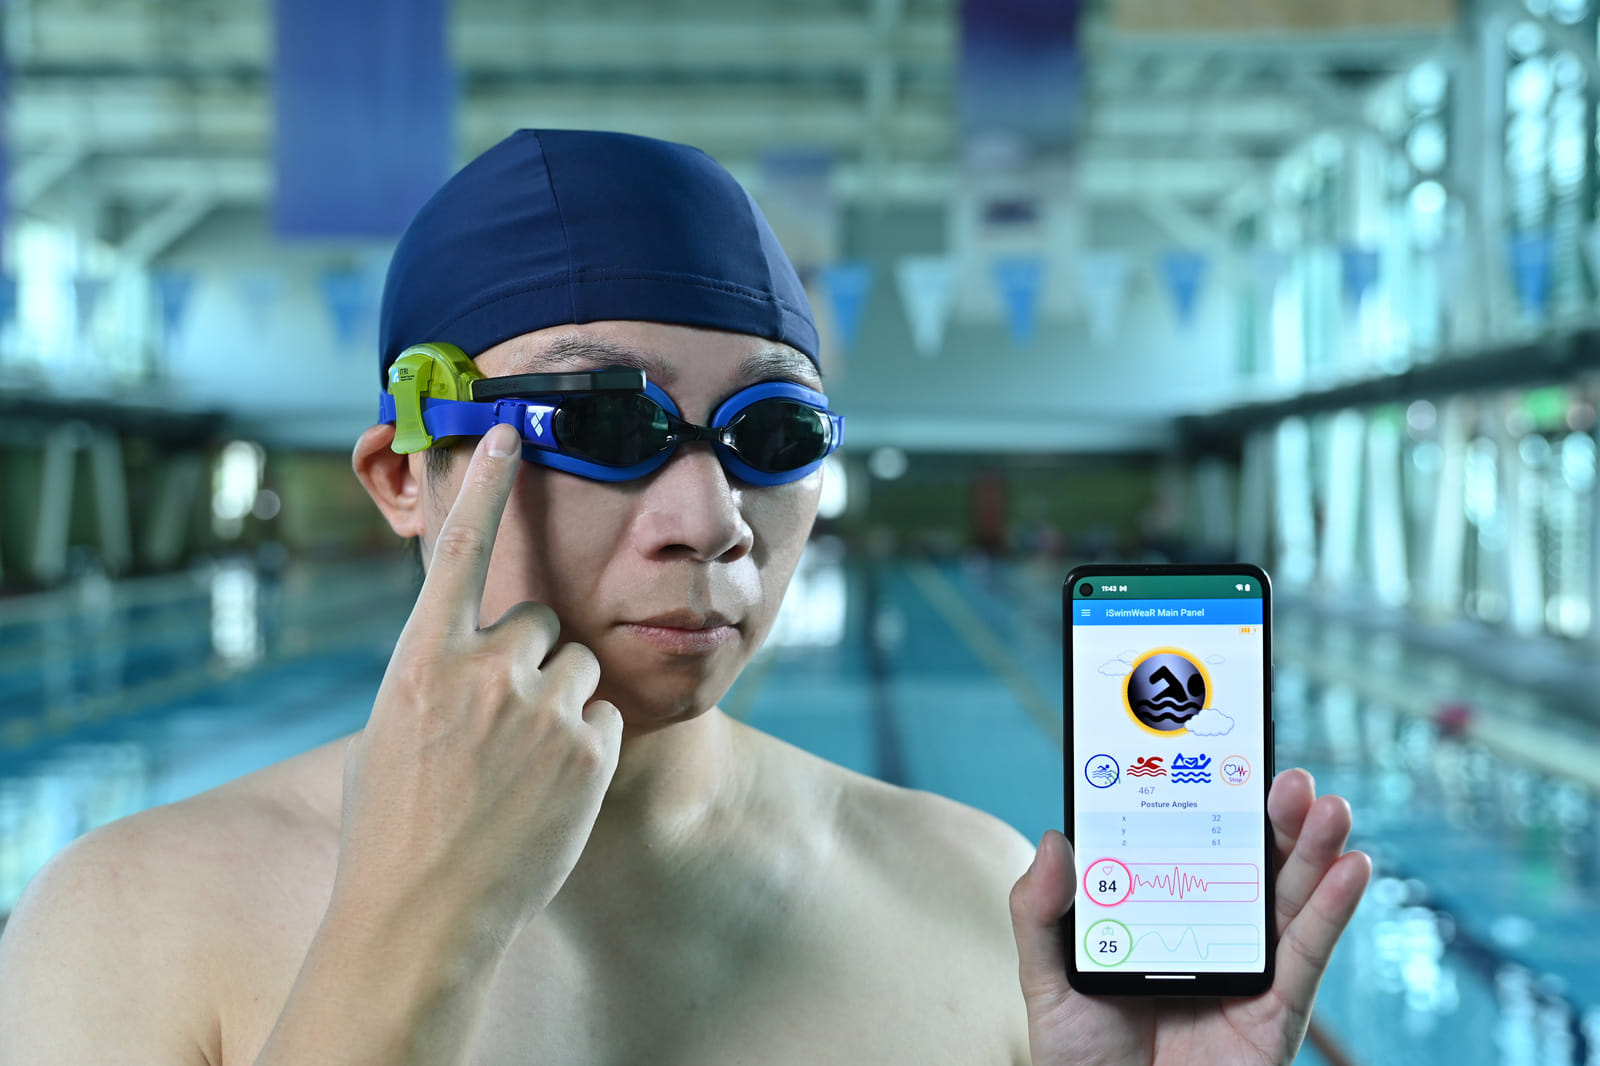 The innovation can be easily applied as an add-on for existing swimming goggles.